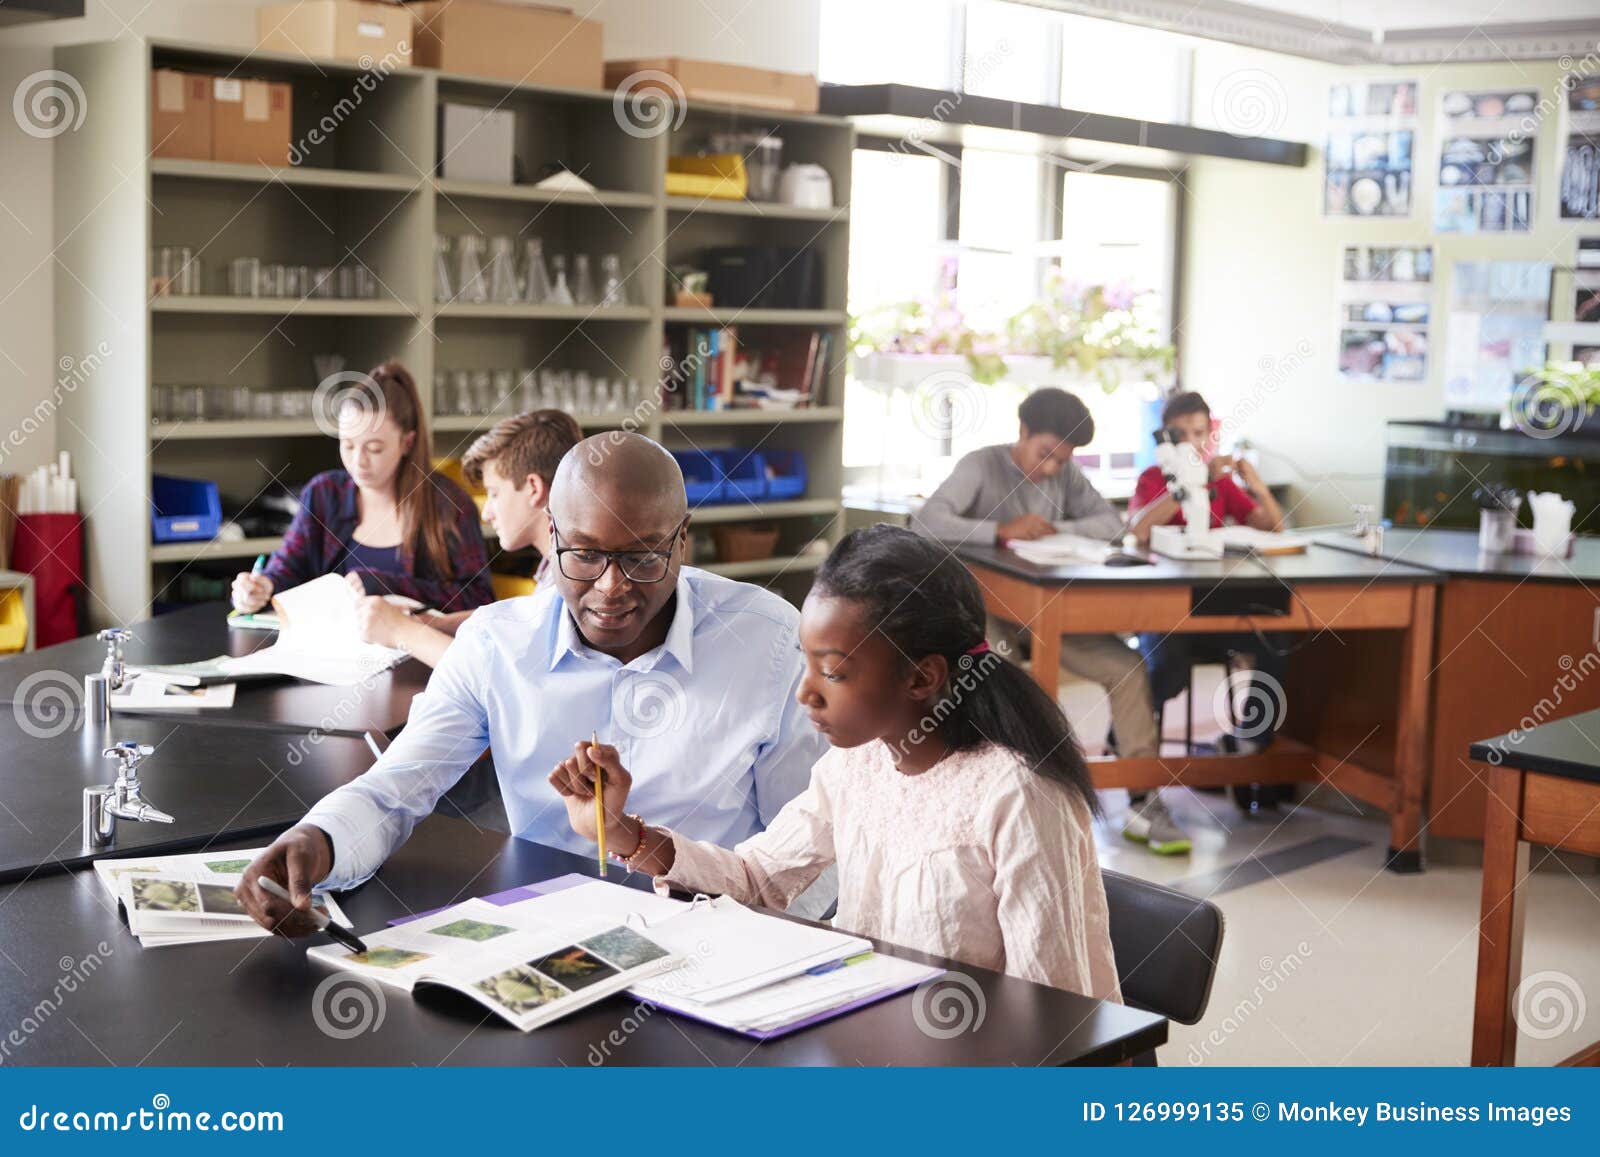 high school tutor sitting at desk with female student in biology class